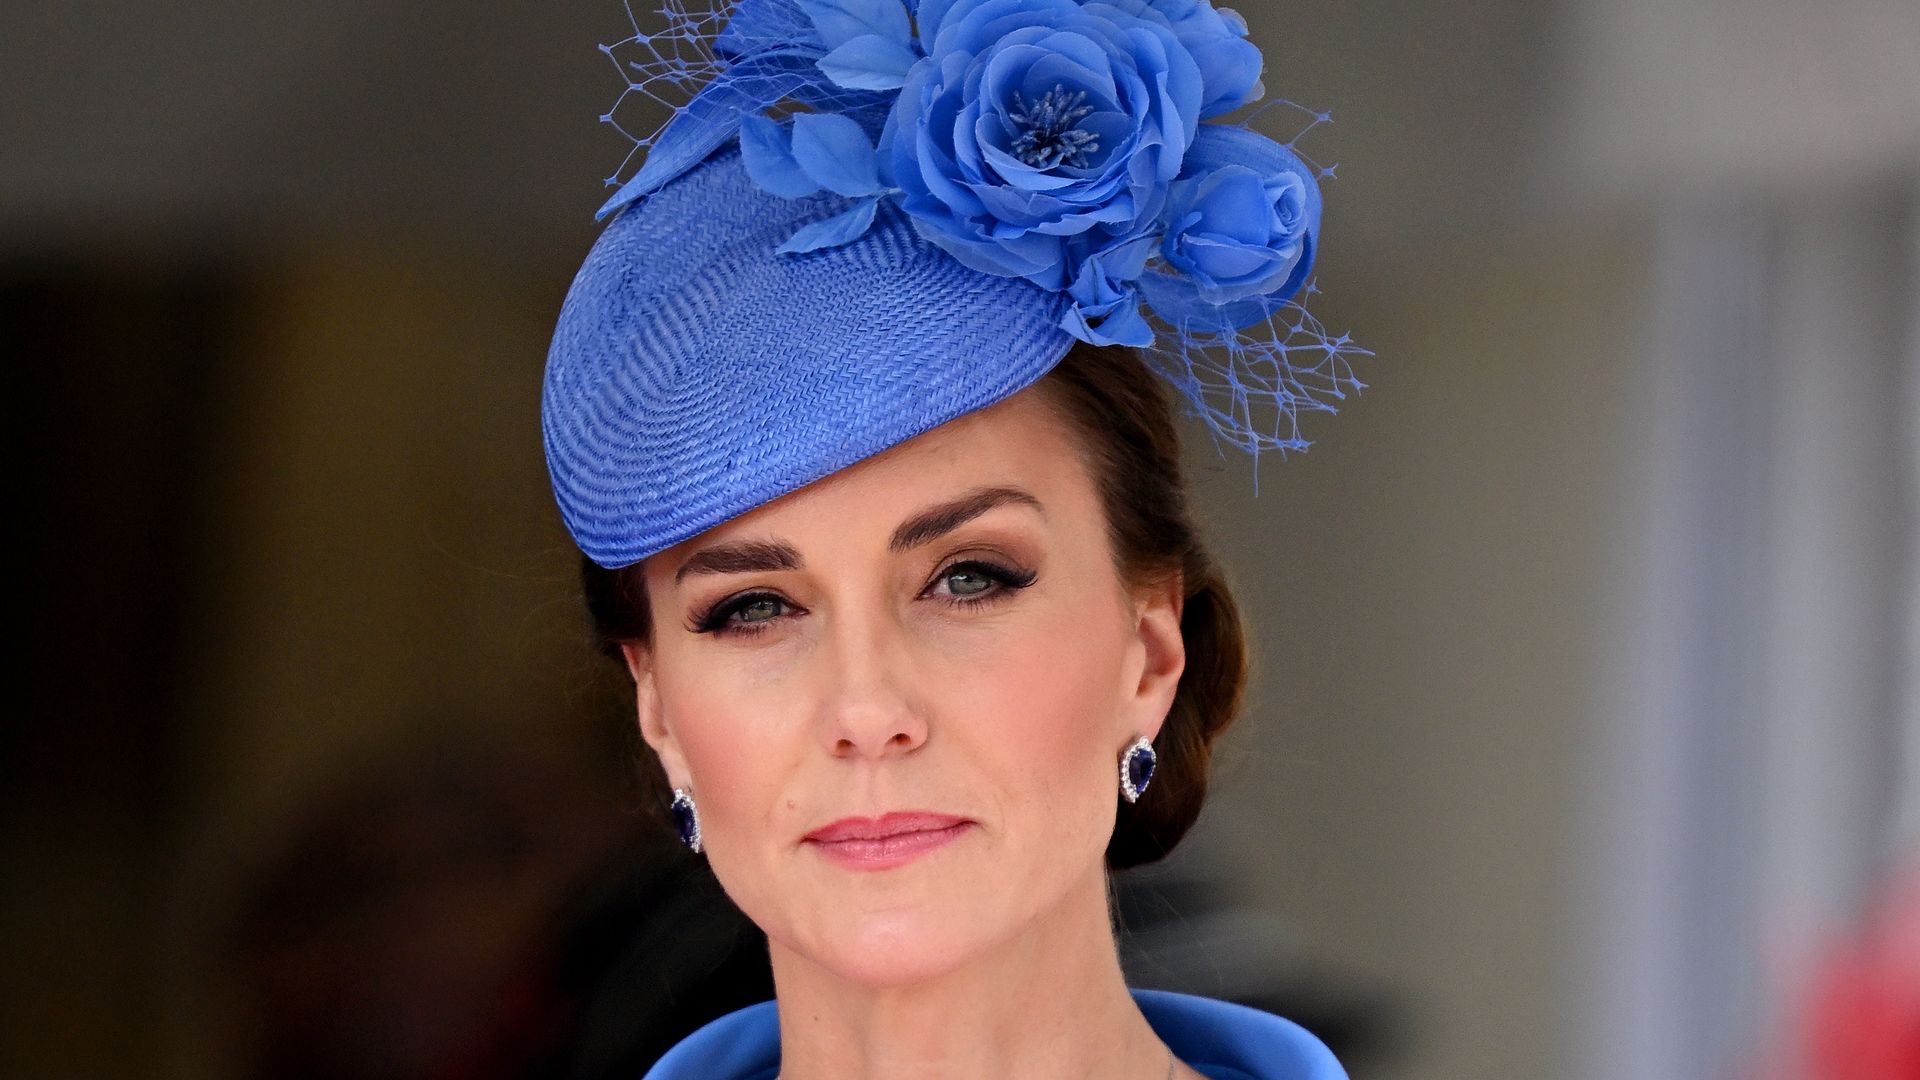 The telling signs that Kate Middleton was delaying her return to royal duties